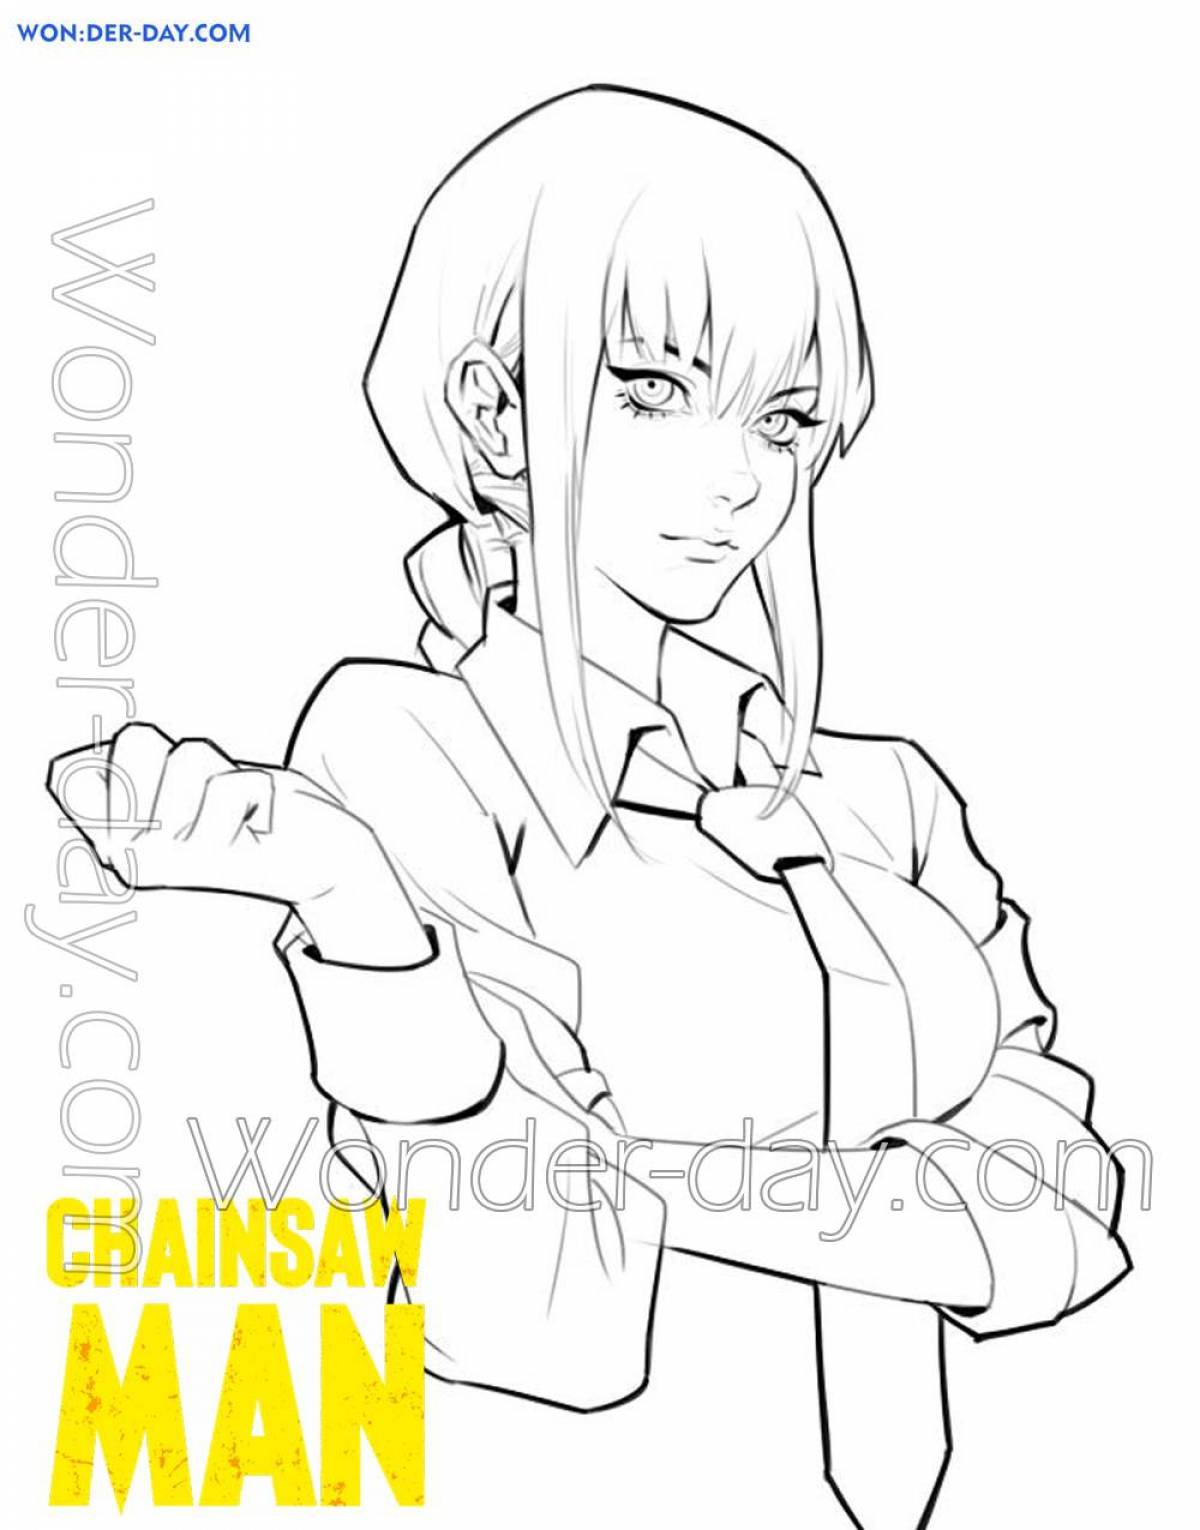 Charming man with a chainsaw anime coloring book